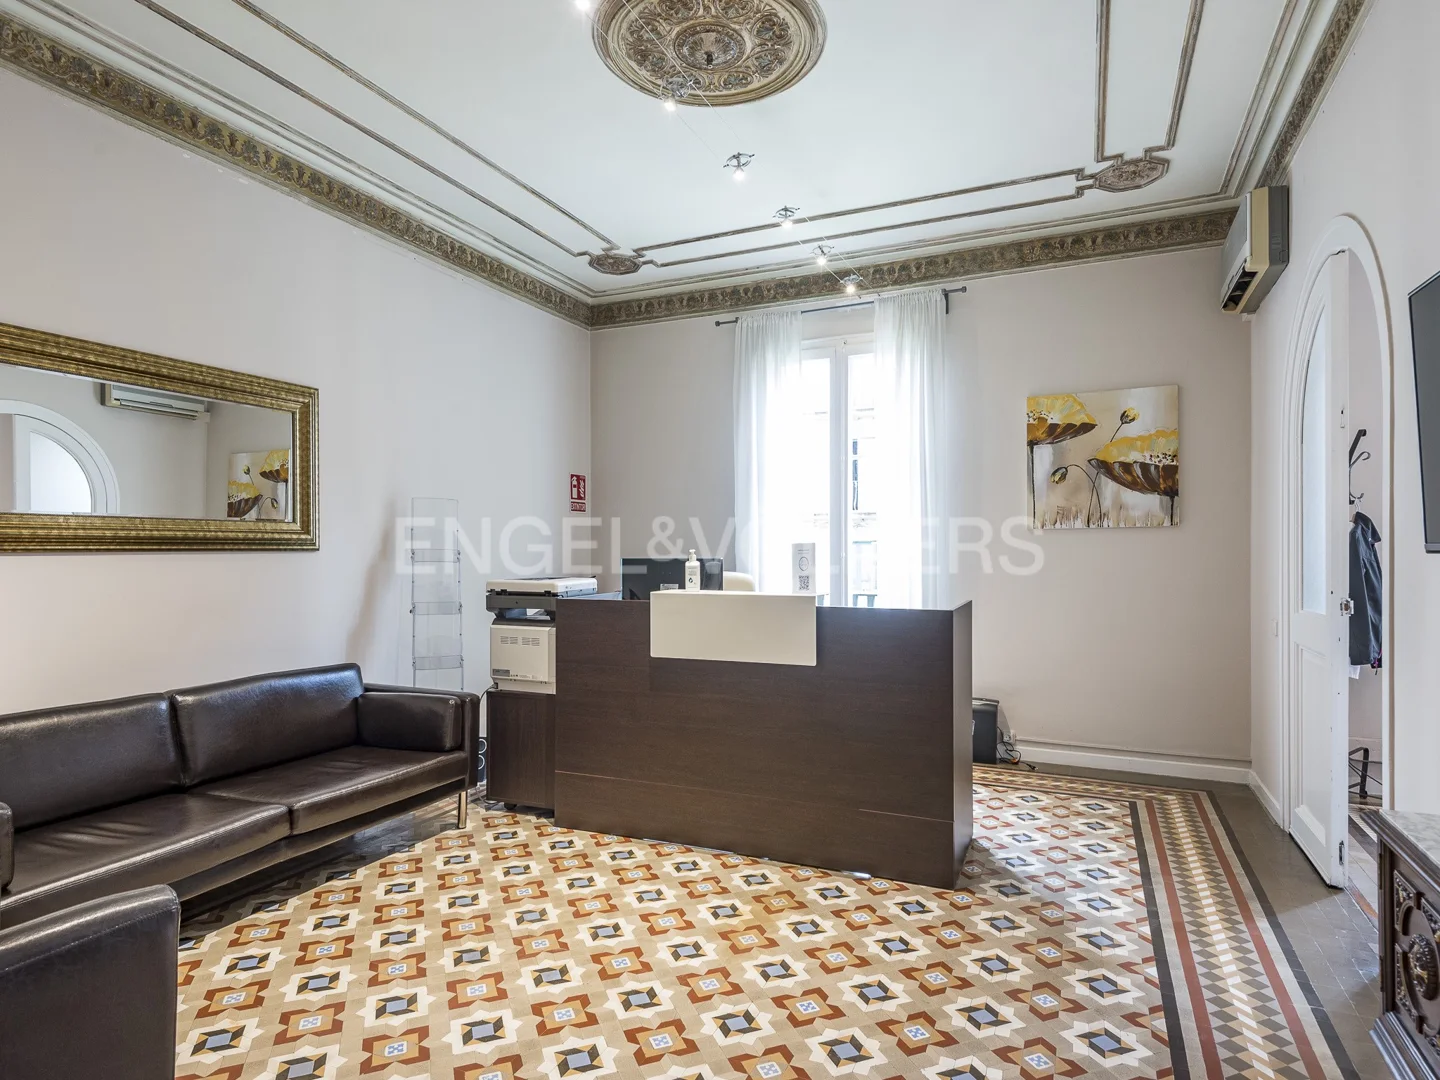 Flat for sale in Eixample Right